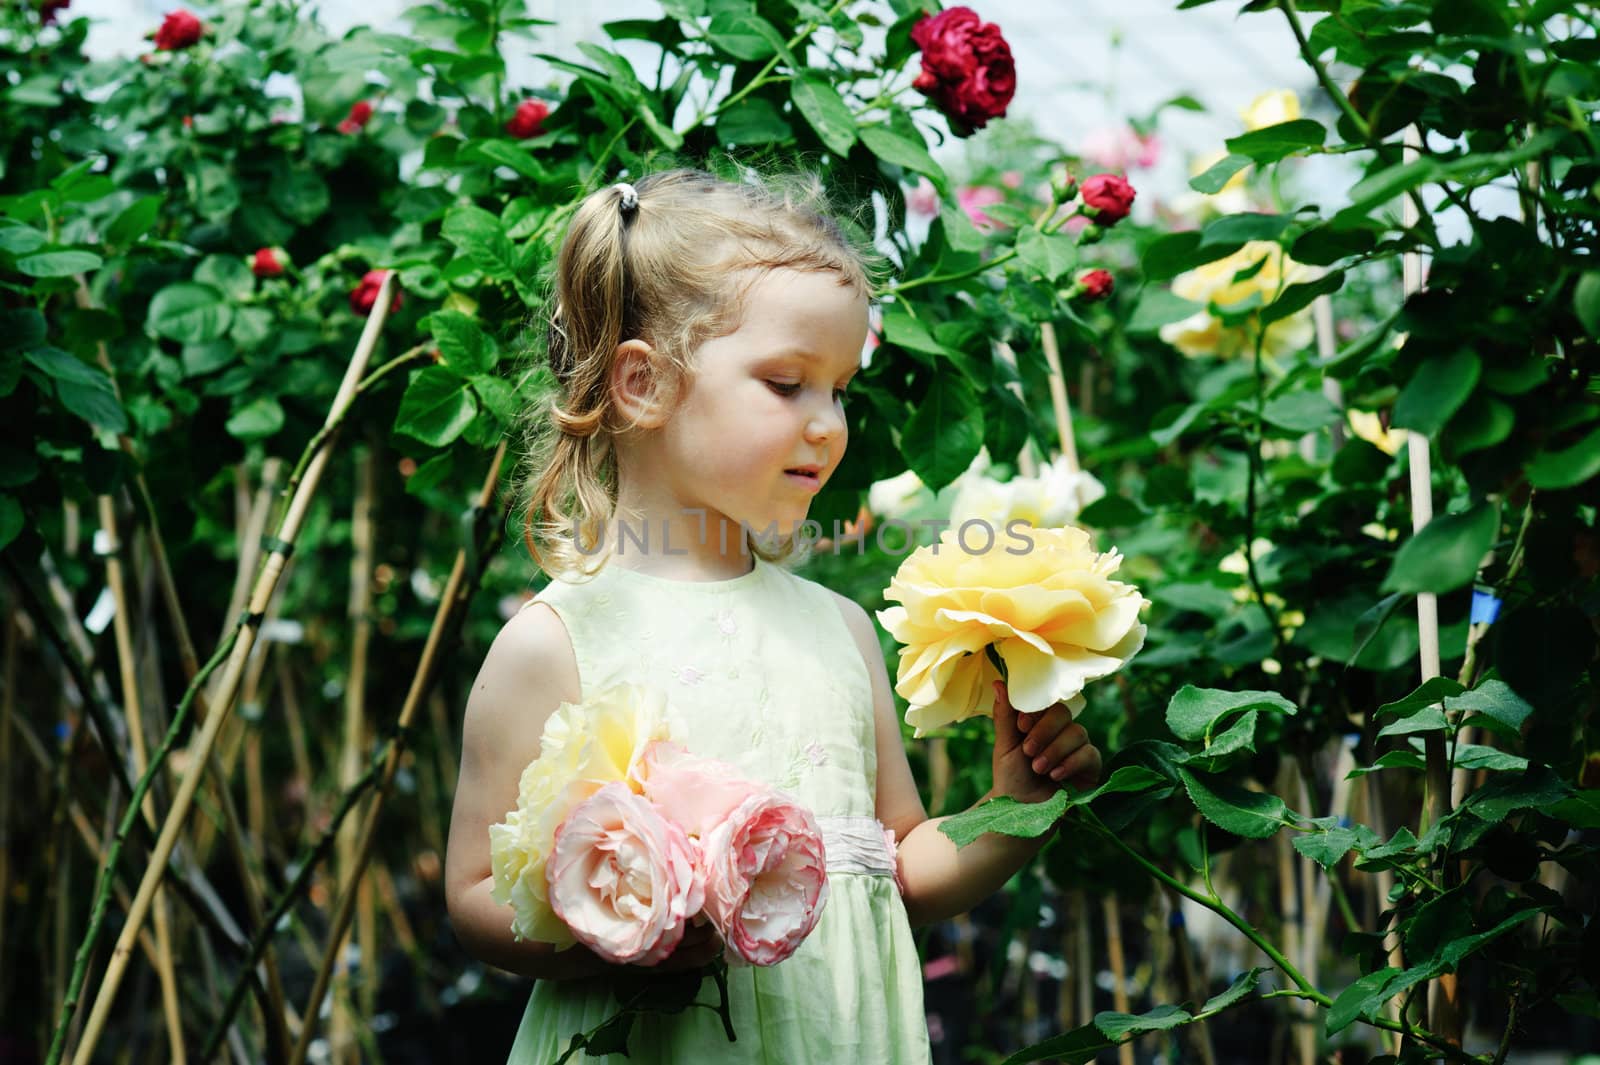 An image of a little girl in a greenhouse